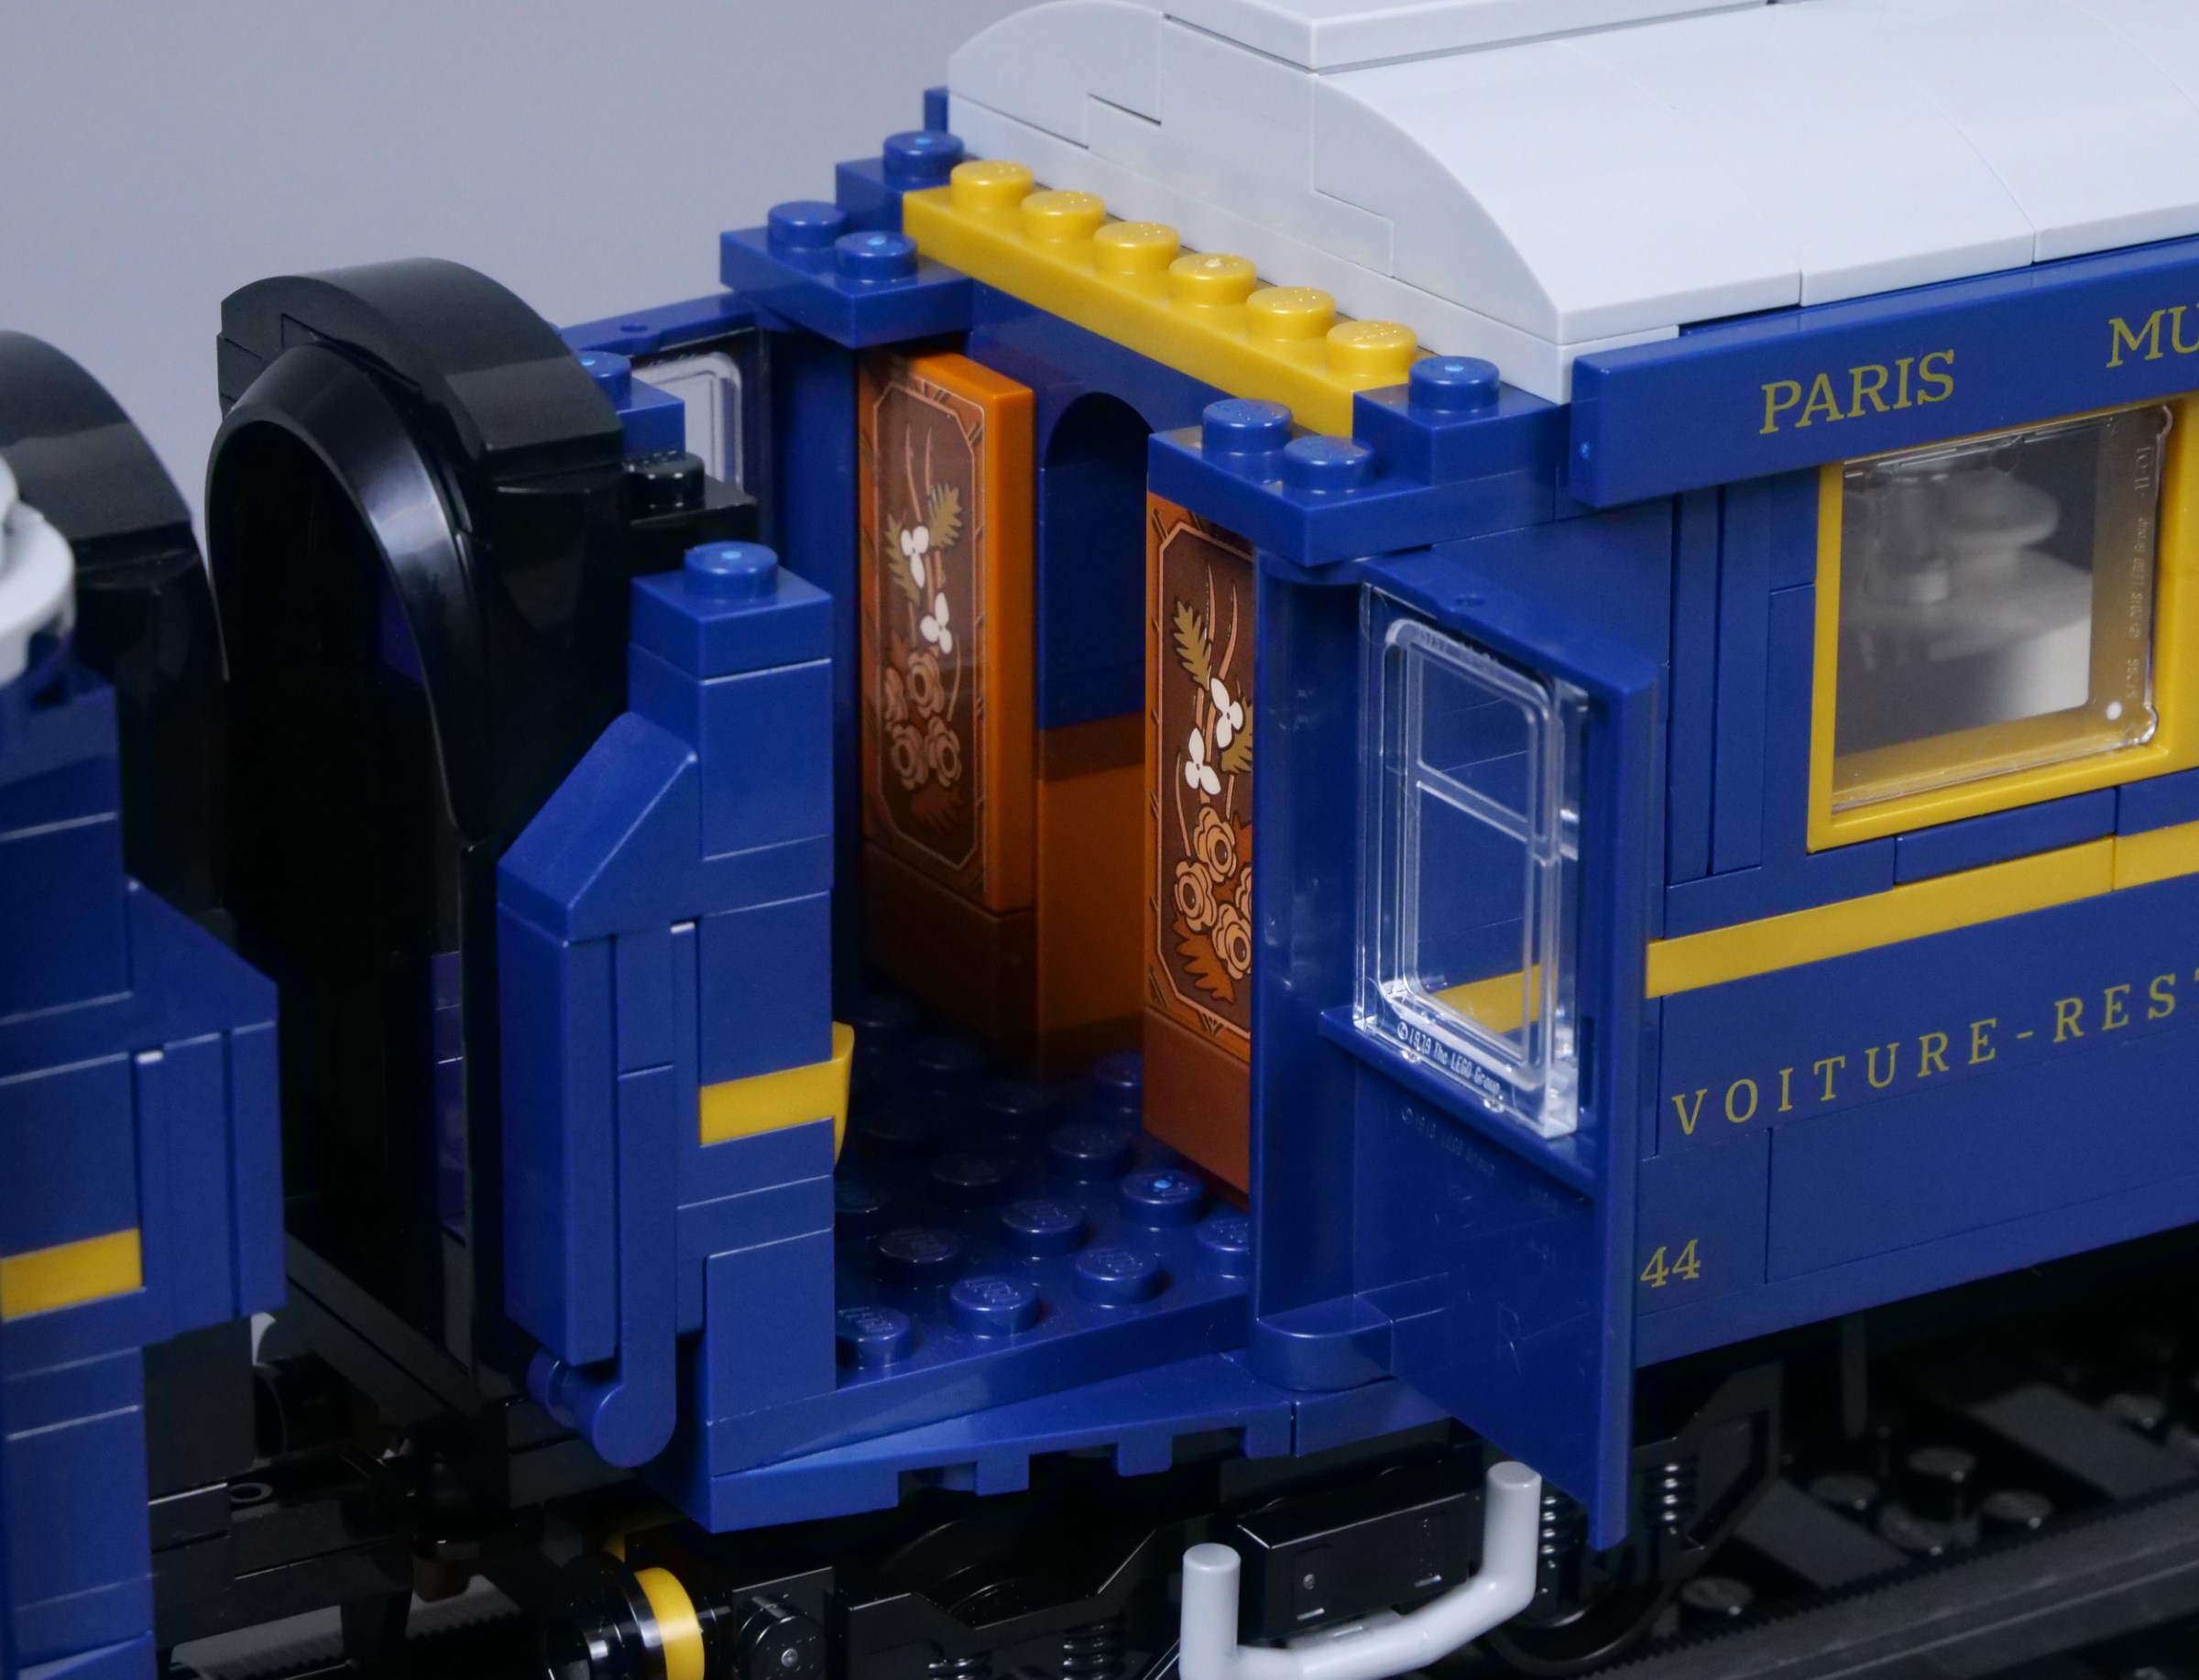 Can anyone figure out what the leaked LEGO Orient Express locomotive is  based on? I haven't seen anyone identify it yet. : r/trains